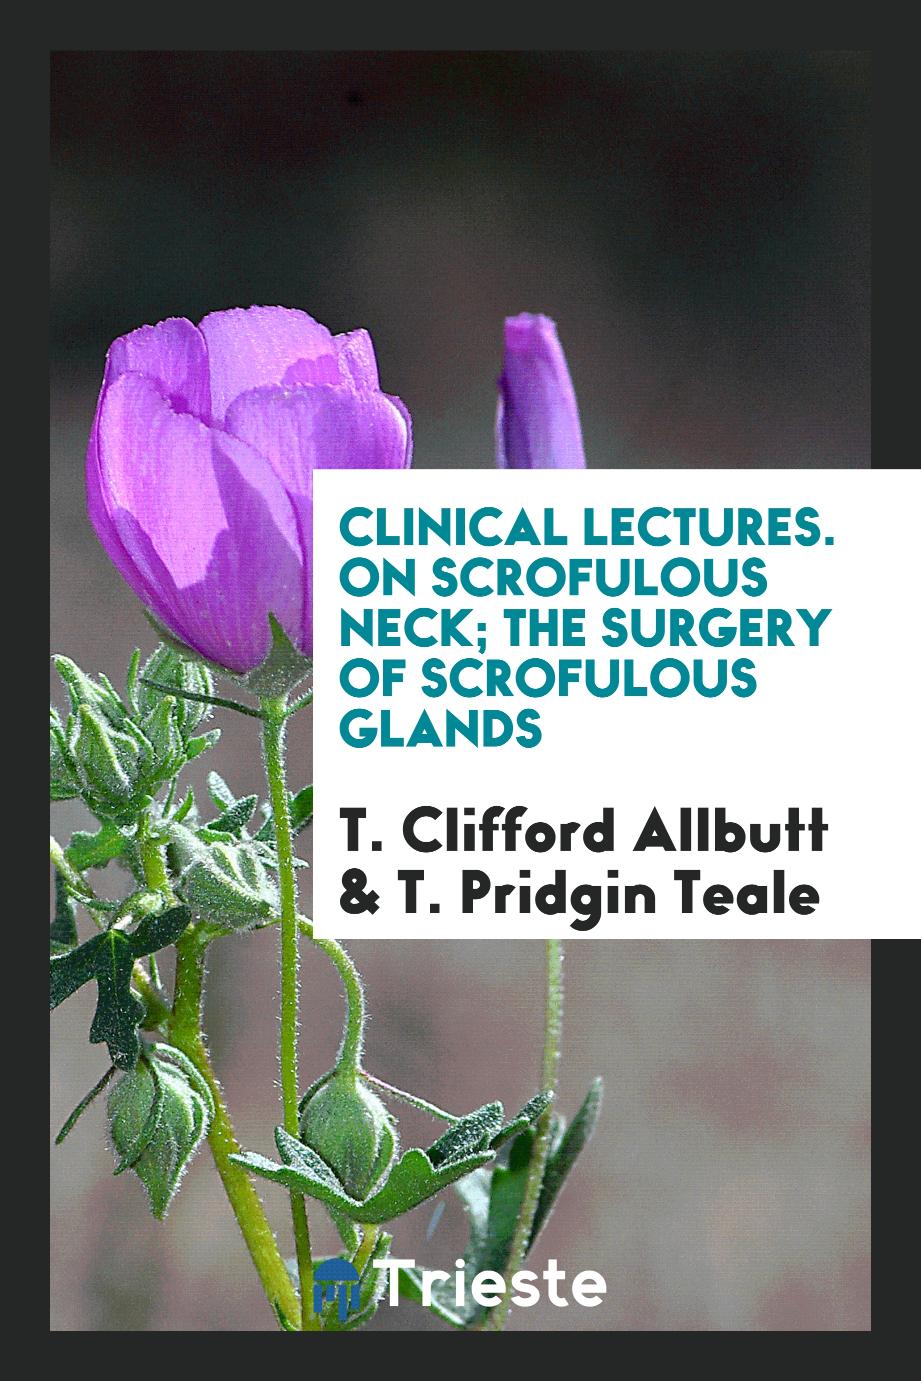 Clinical Lectures. On Scrofulous Neck; The Surgery of Scrofulous Glands